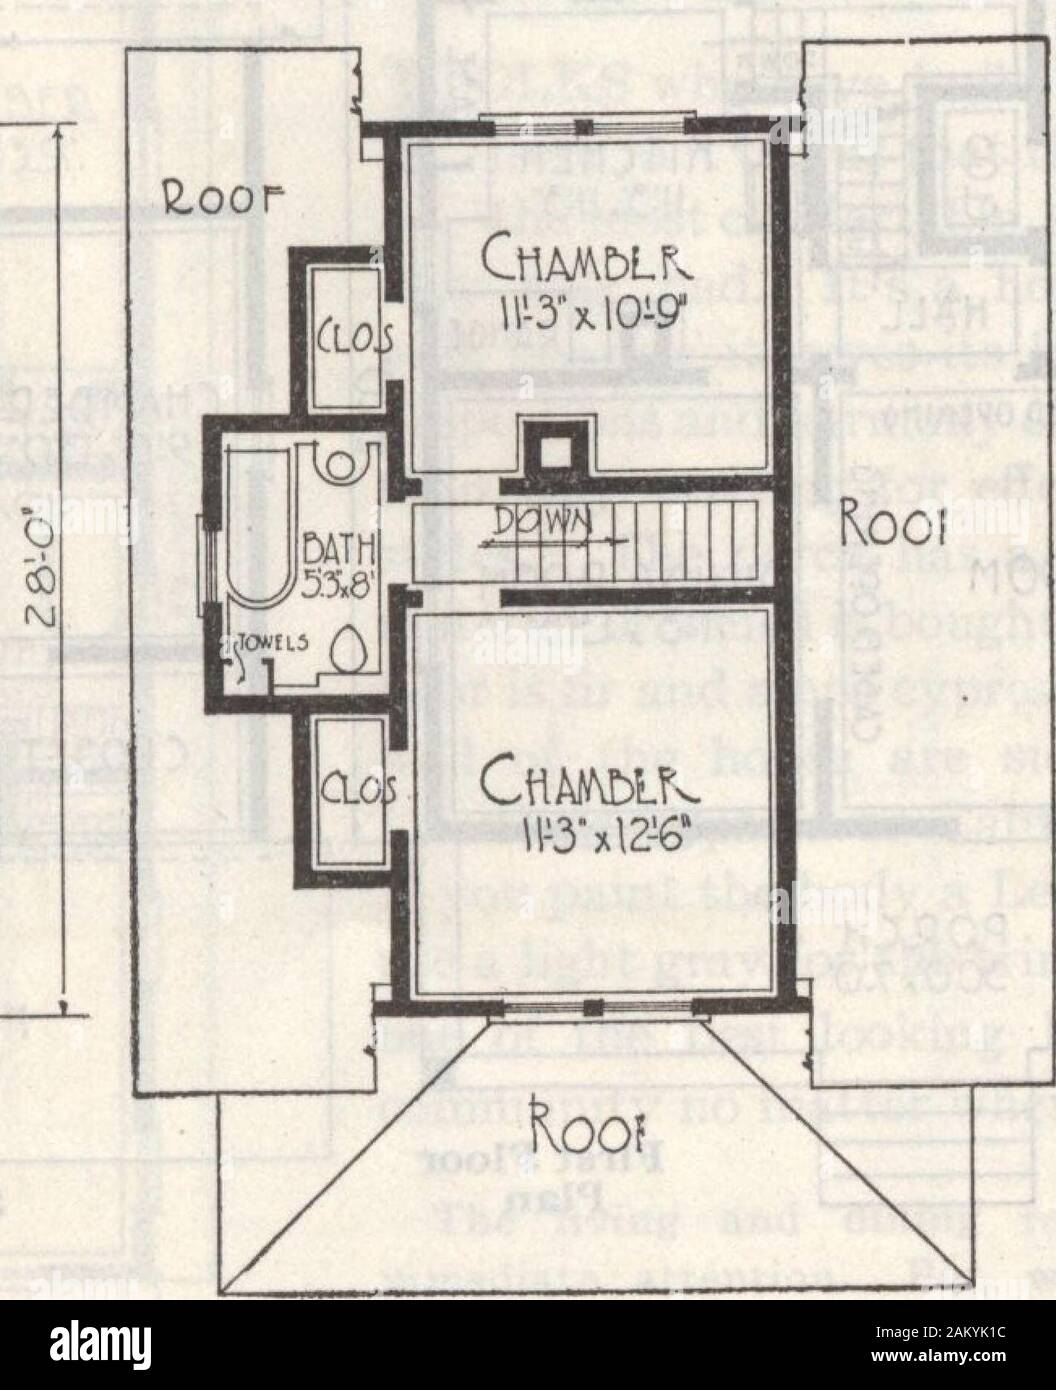 Gordon-Van Tine homes . | Living Koo/a ° U^3x6l-9U ZOx k- —m o=* First FloorPlan. Second Floor Plan Gordon-Van Tine Co., Davenport, Iowa.   • Algona, Iowa Gentlemen: Some days ago I received a tette? from Mr. H. B. Nelson requestingme to have a picture taken of my house plan and also one picture from the interior.I have complied with his request. The stairway is certainly as fine a feature as thereis in any part of the house and the finish is certainly fine. I did the work on thecase myself and most of the finishing. , J must say I am more than pleased with my home. Everybody that has seen the Stock Photo